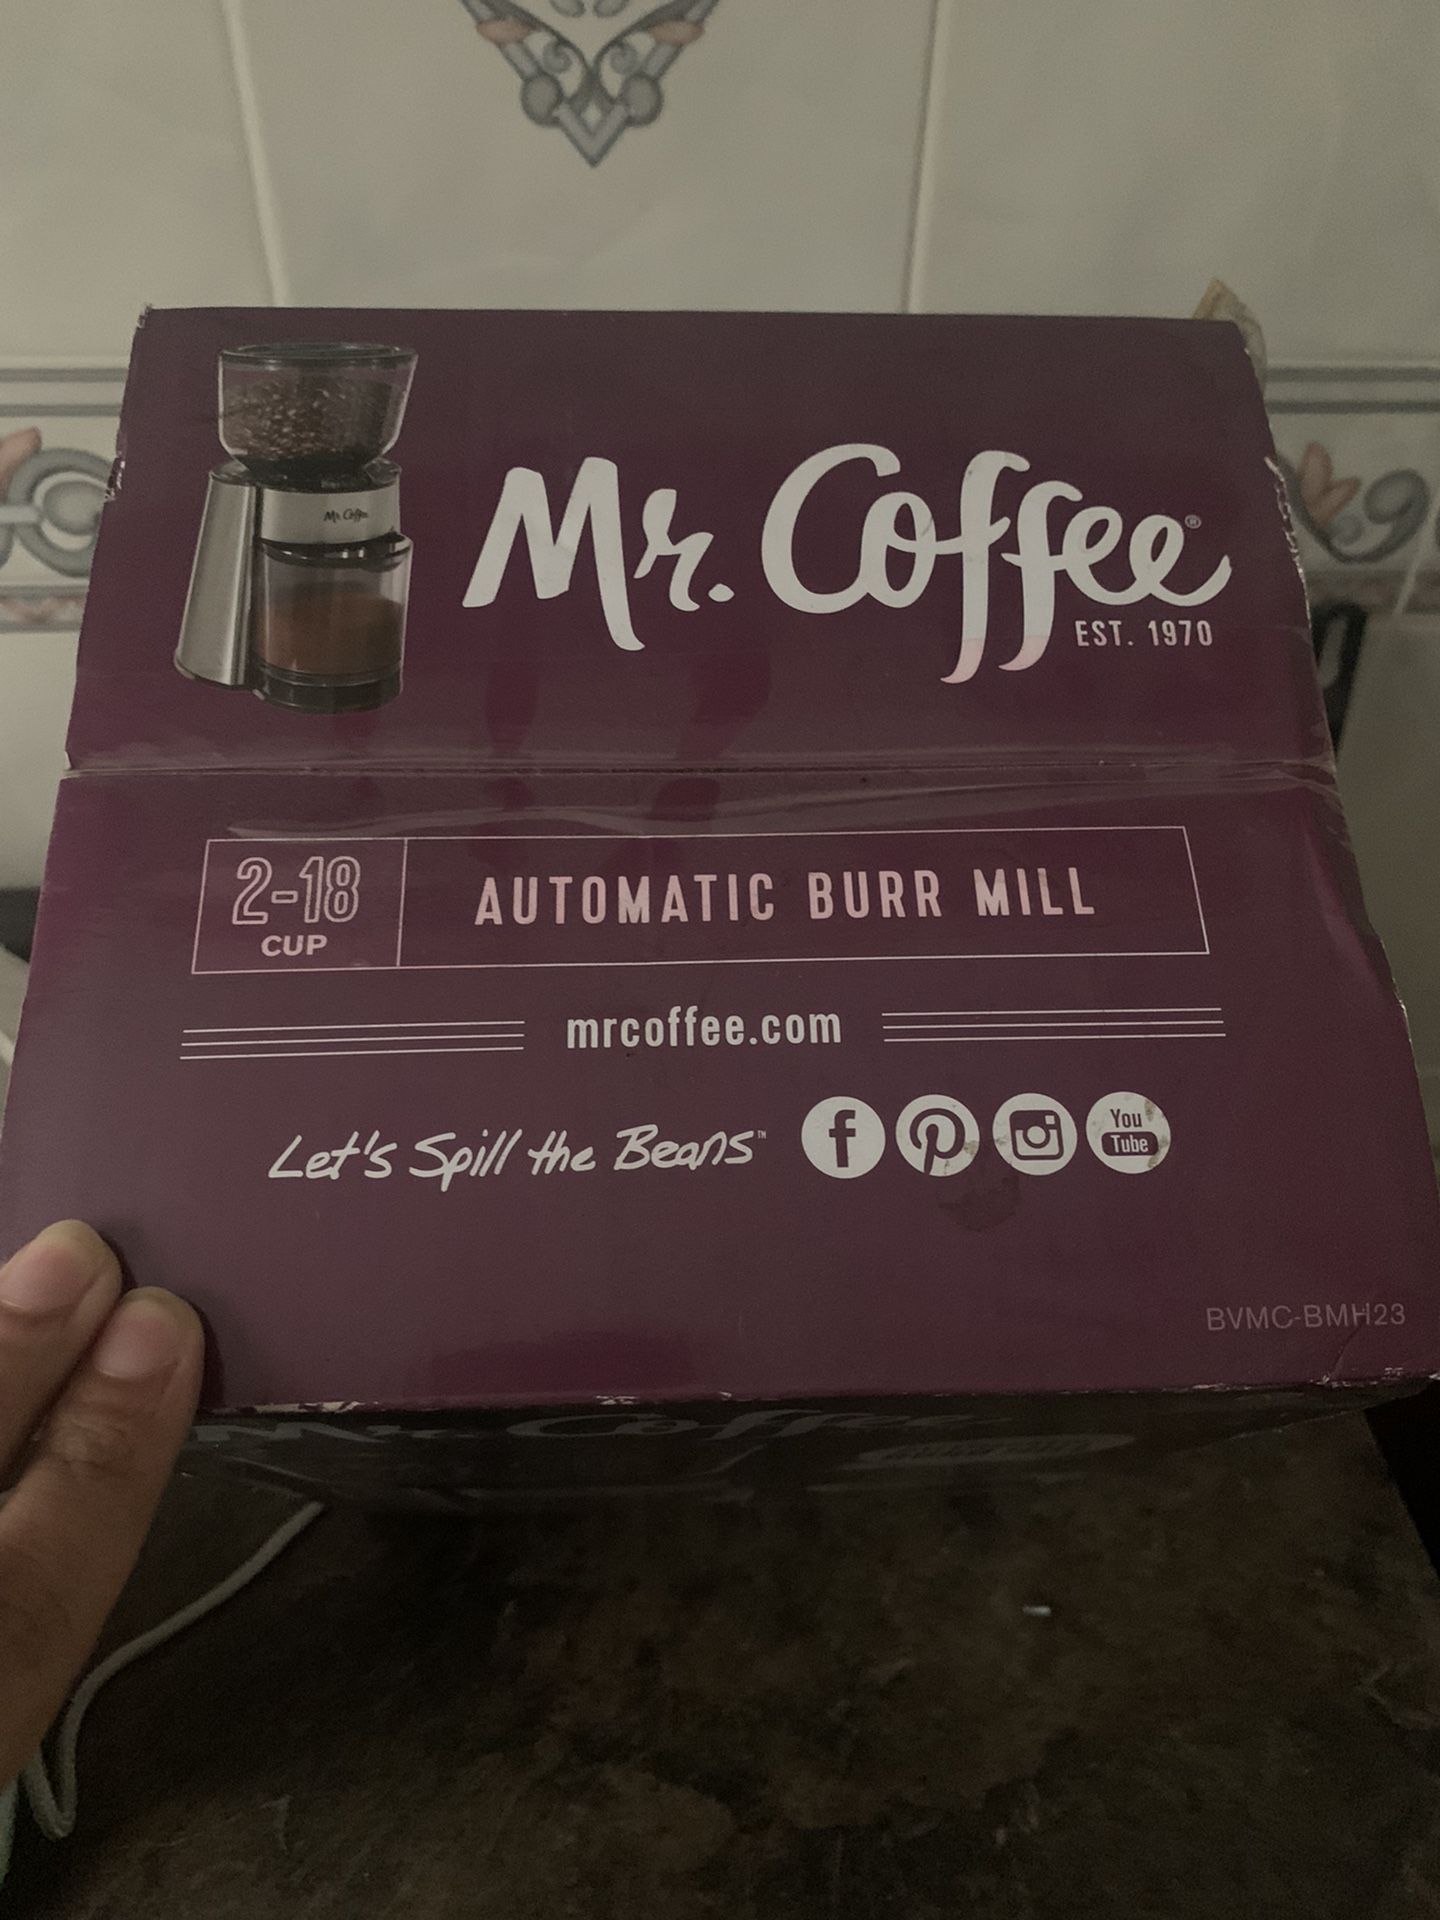 Mr Coffee Coffee Grinder BRAND NEW for Sale in Bronxville, NY